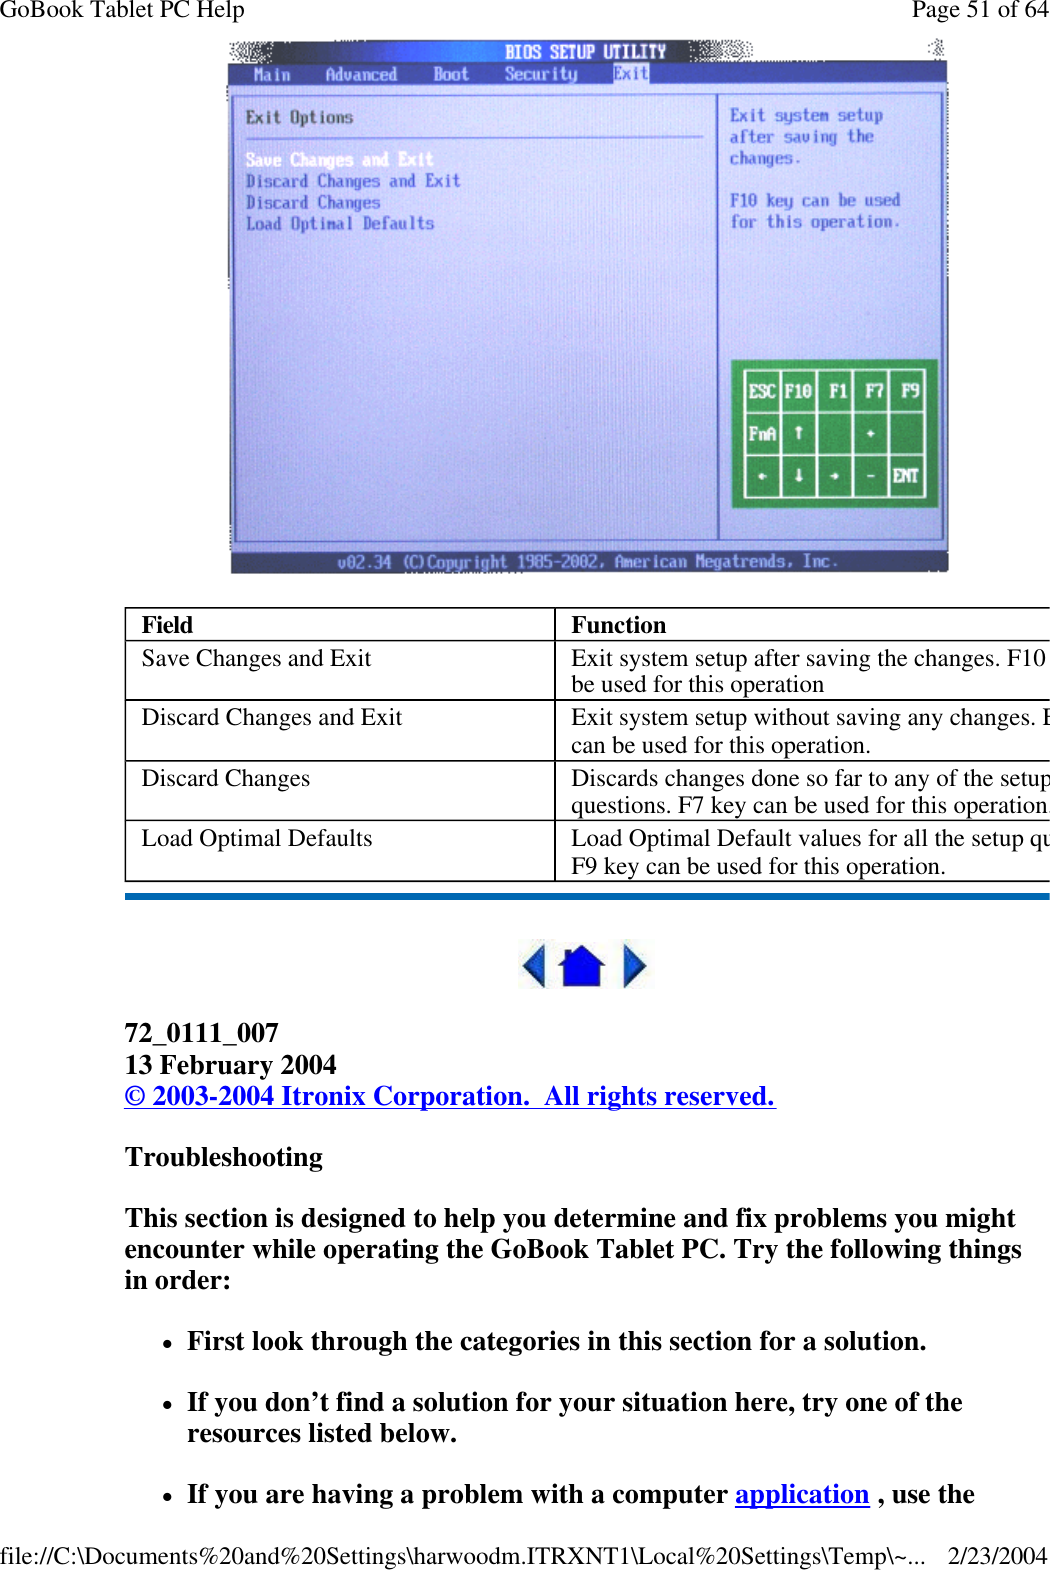   72_0111_007 13 February 2004 © 2003-2004 Itronix Corporation.  All rights reserved. Troubleshooting This section is designed to help you determine and fix problems you might encounter while operating the GoBook Tablet PC. Try the following things in order:  lFirst look through the categories in this section for a solution.  lIf you don’t find a solution for your situation here, try one of the resources listed below. lIf you are having a problem with a computer application , use the Field Function Save Changes and Exit Exit system setup after saving the changes. F10 key can be used for this operation Discard Changes and Exit Exit system setup without saving any changes. ESC key can be used for this operation. Discard Changes Discards changes done so far to any of the setup questions. F7 key can be used for this operation.Load Optimal Defaults Load Optimal Default values for all the setup questions. F9 key can be used for this operation. Page 51 of 64GoBook Tablet PC Help2/23/2004file://C:\Documents%20and%20Settings\harwoodm.ITRXNT1\Local%20Settings\Temp\~...